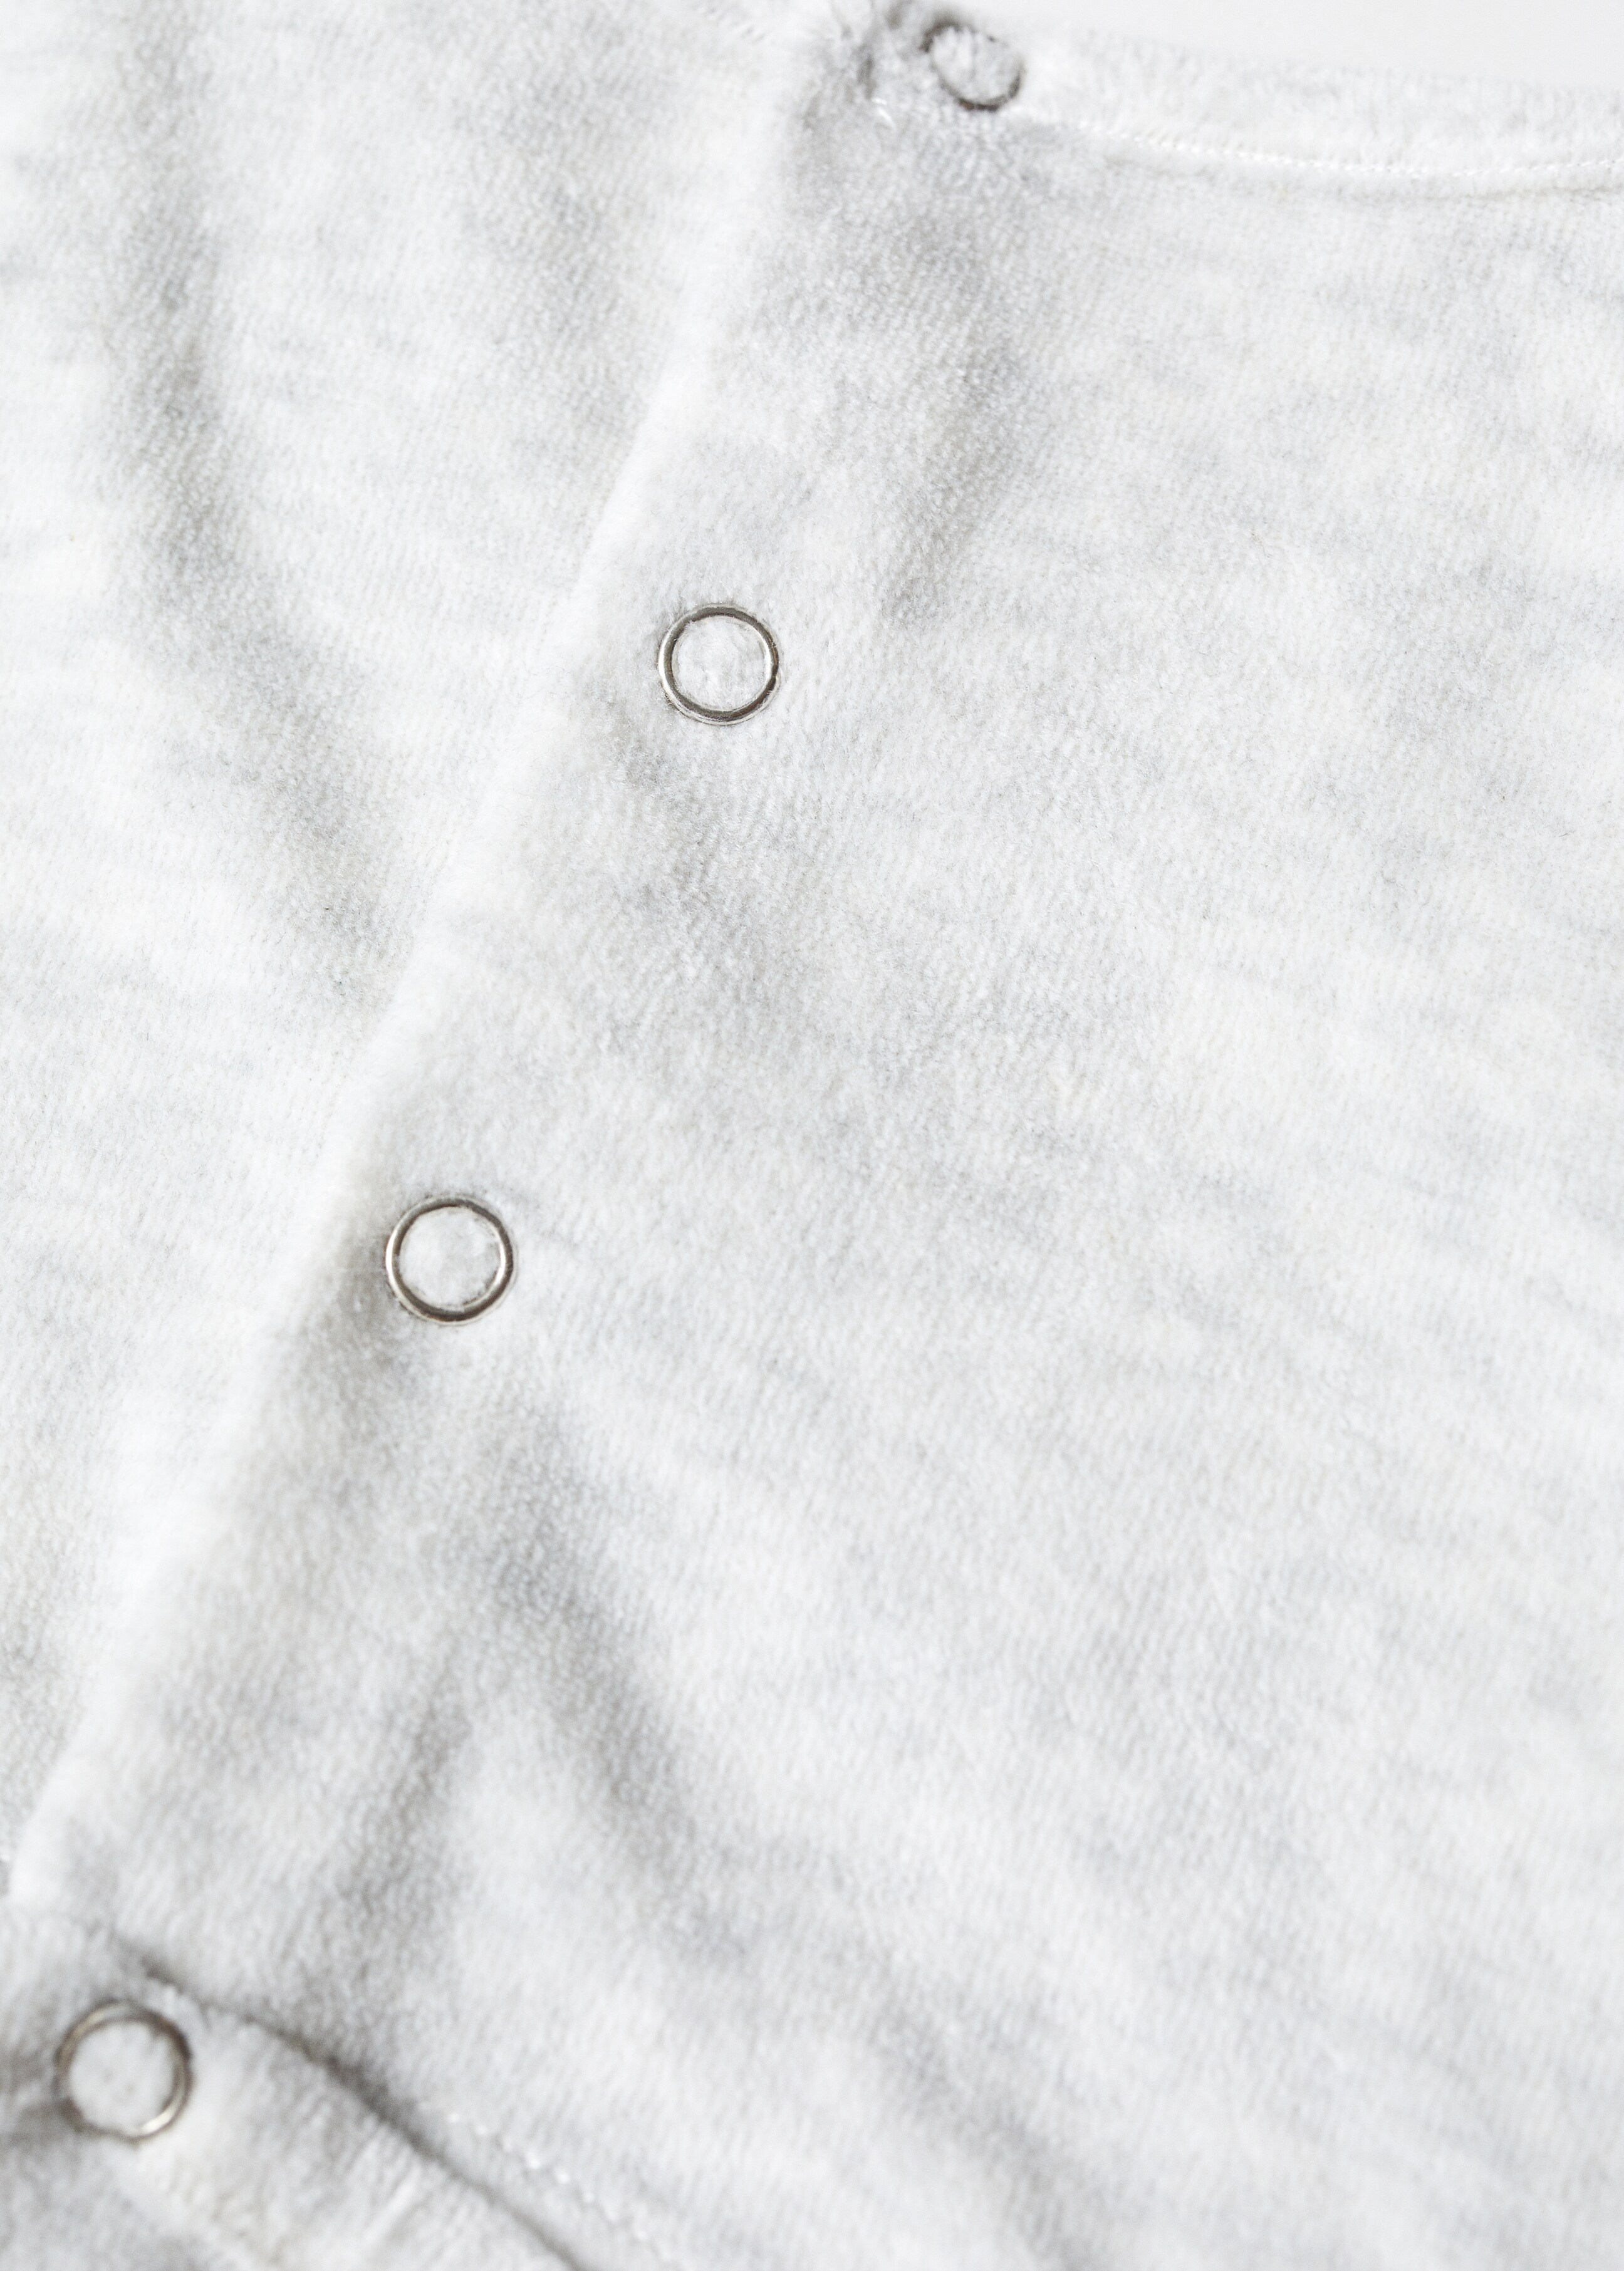 Cotton body pyjamas - Details of the article 0